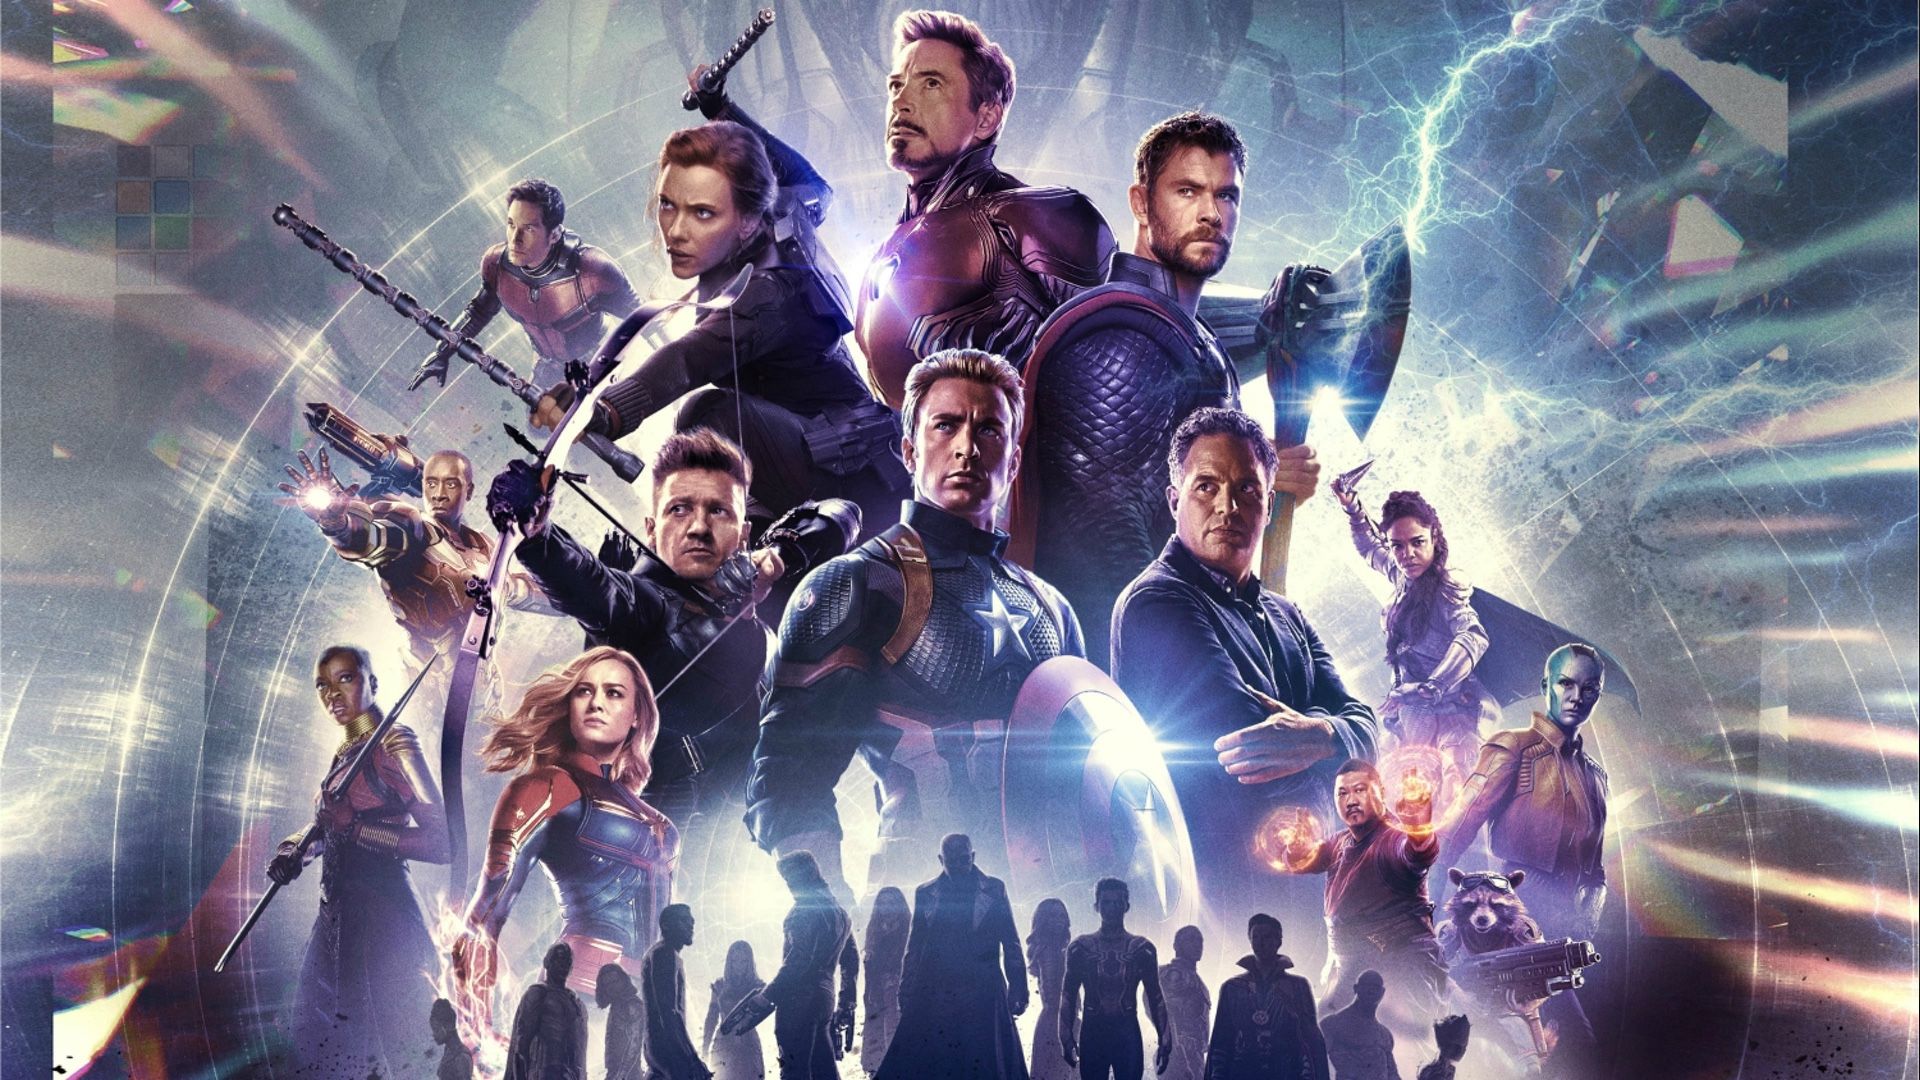 AVENGERS: ENDGAME Blows Up With a $1.2 Billion Global Opening